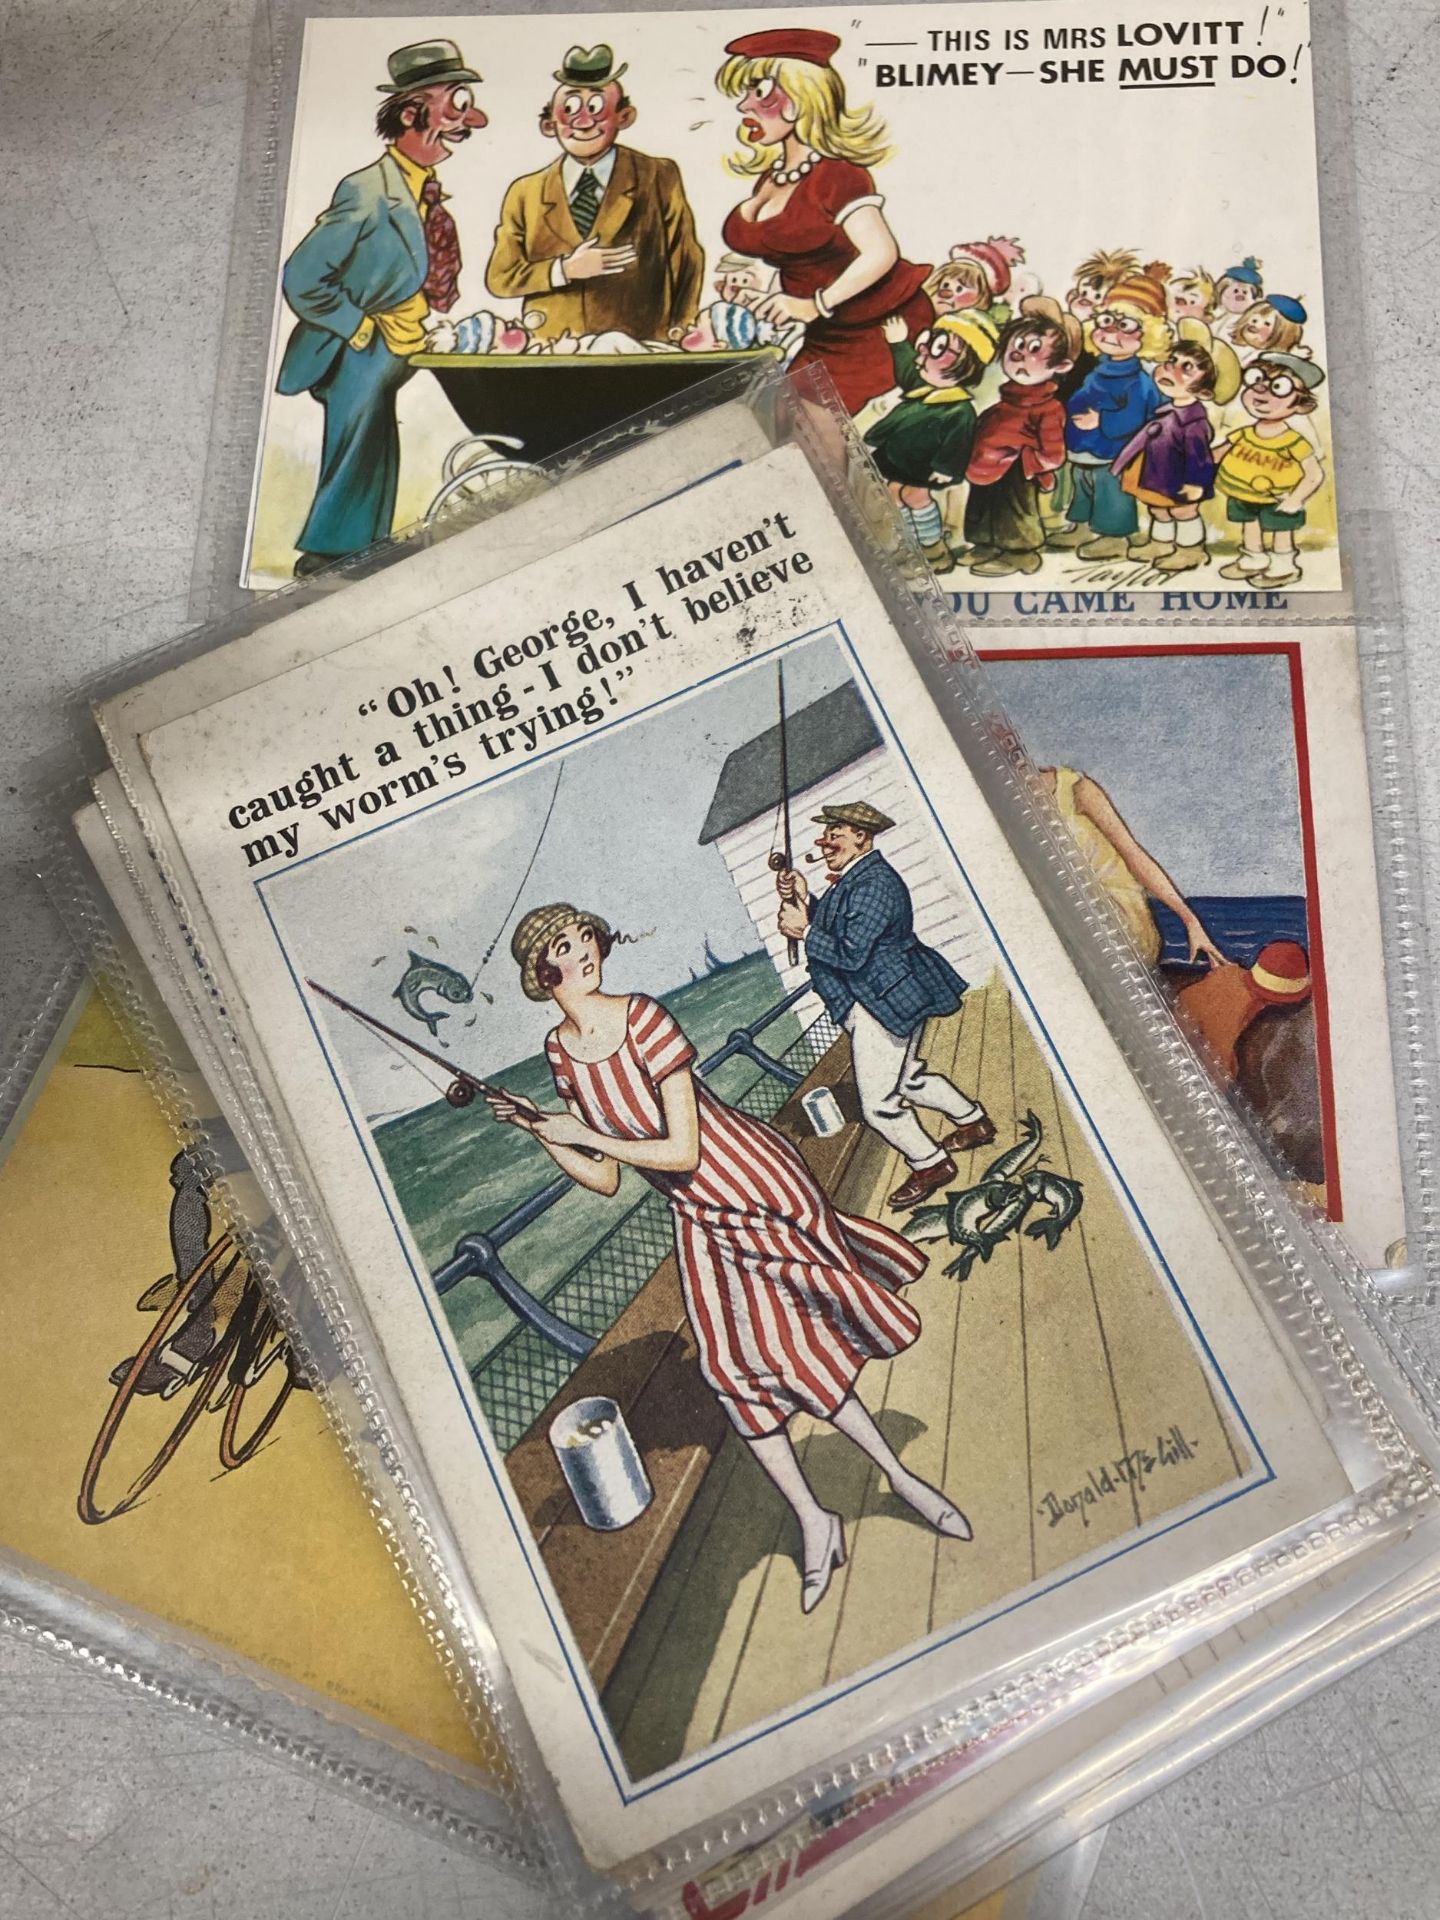 A COLLECTION OF CHEEKY 1930'S/40'S VINTAGE POSTCARDS - Image 4 of 4